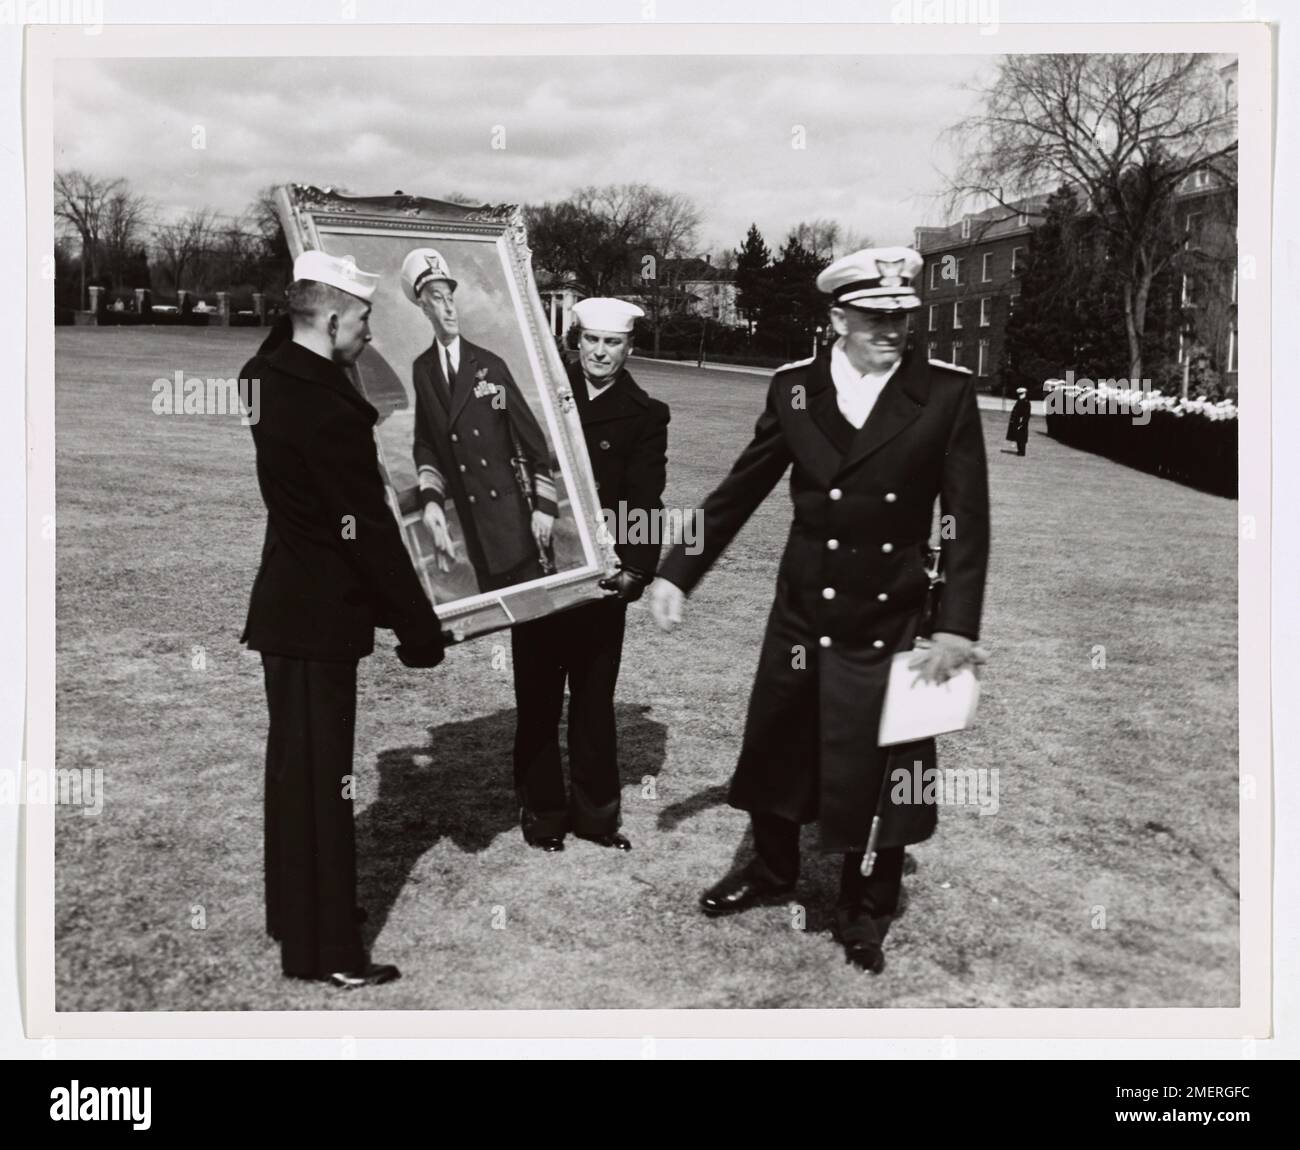 Photograph of Coast Guard Personnel Carrying a Framed Portrait. Stock Photo